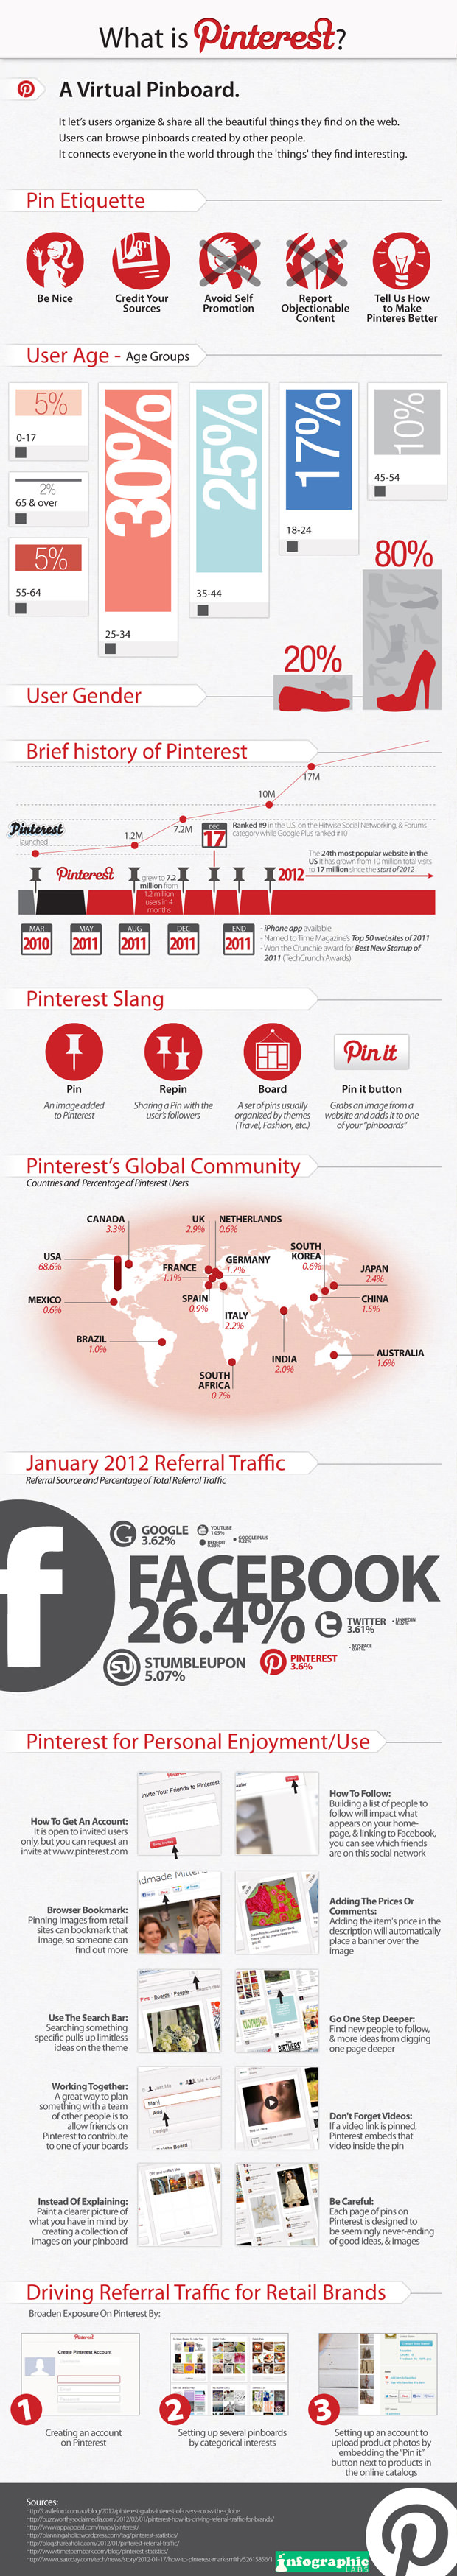 What is Pinterest - infographic